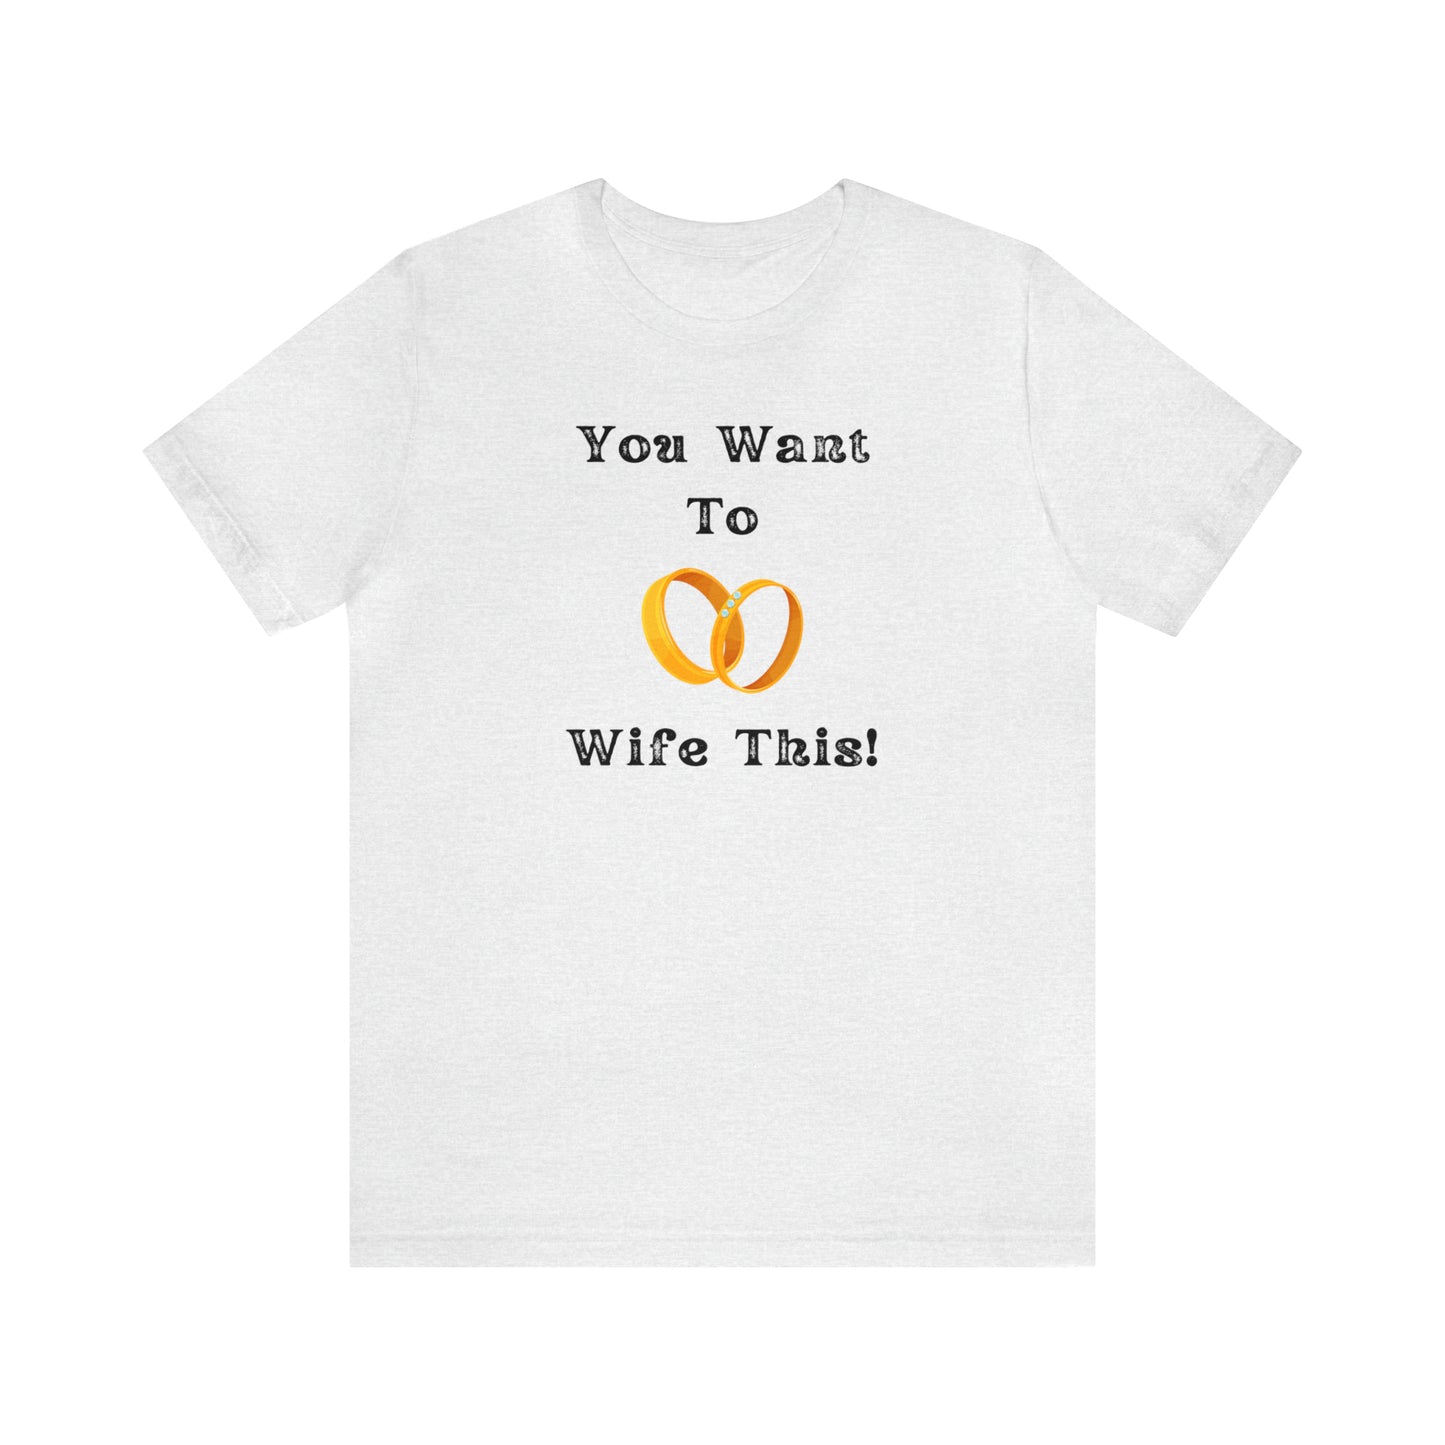 You Want To Wife This Premium Unisex T Shirt | Fun Conversation Starter Tee | Soft Comfortable And Humorous Tee | Stand Out From The Crowd